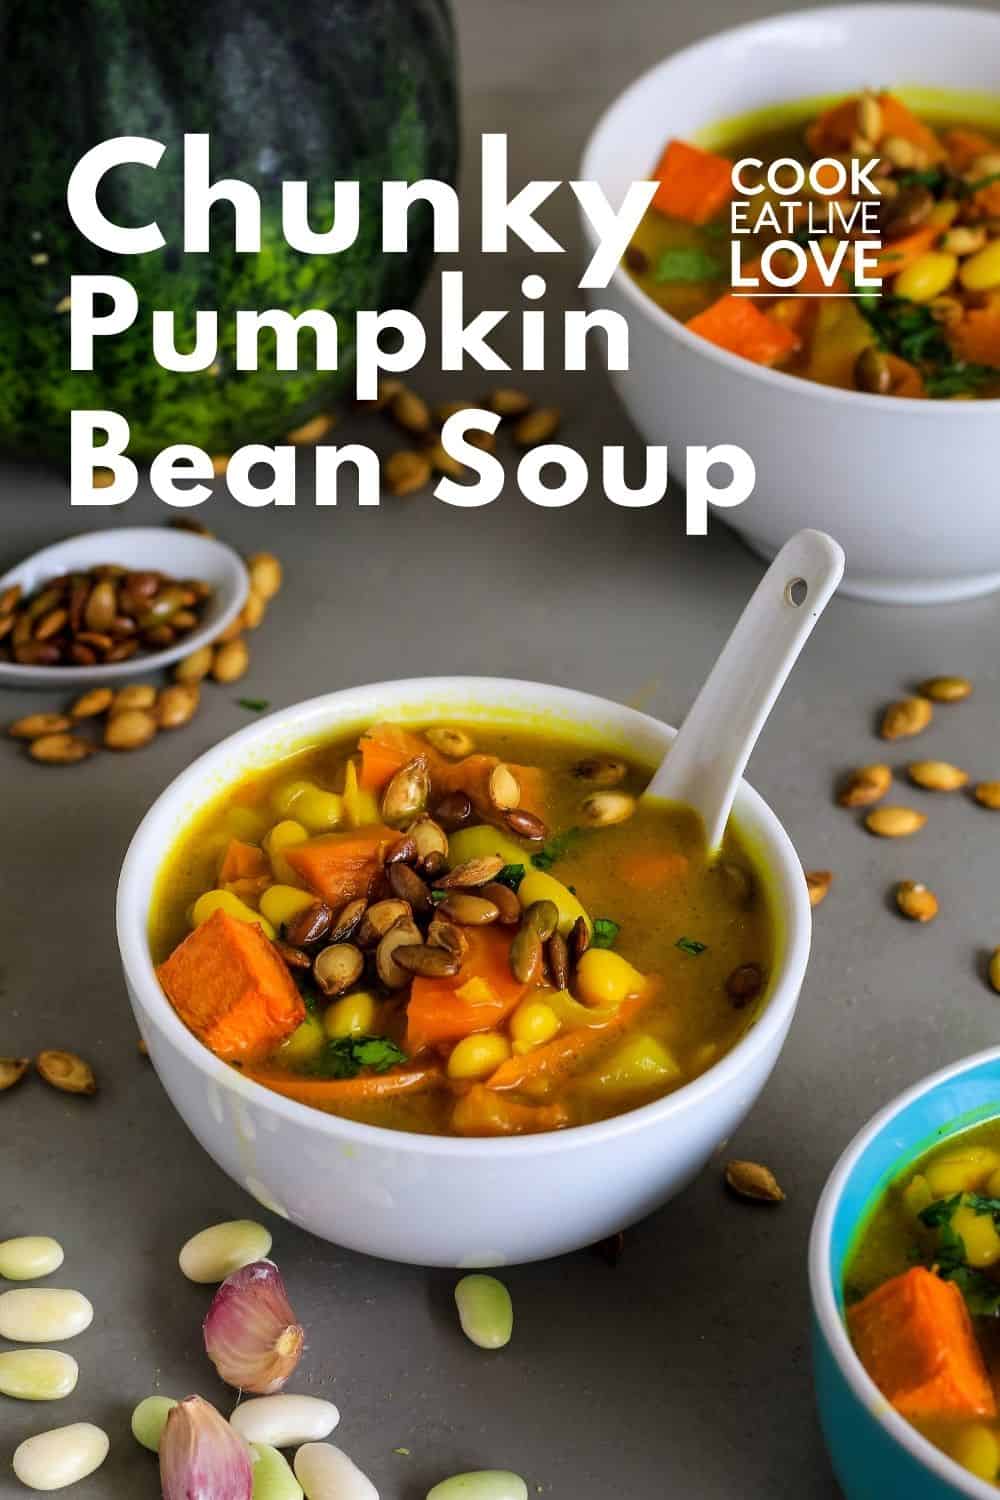 Healthy Pumpkin Soup Recipe with White Beans ~ Cook Eat Live Love